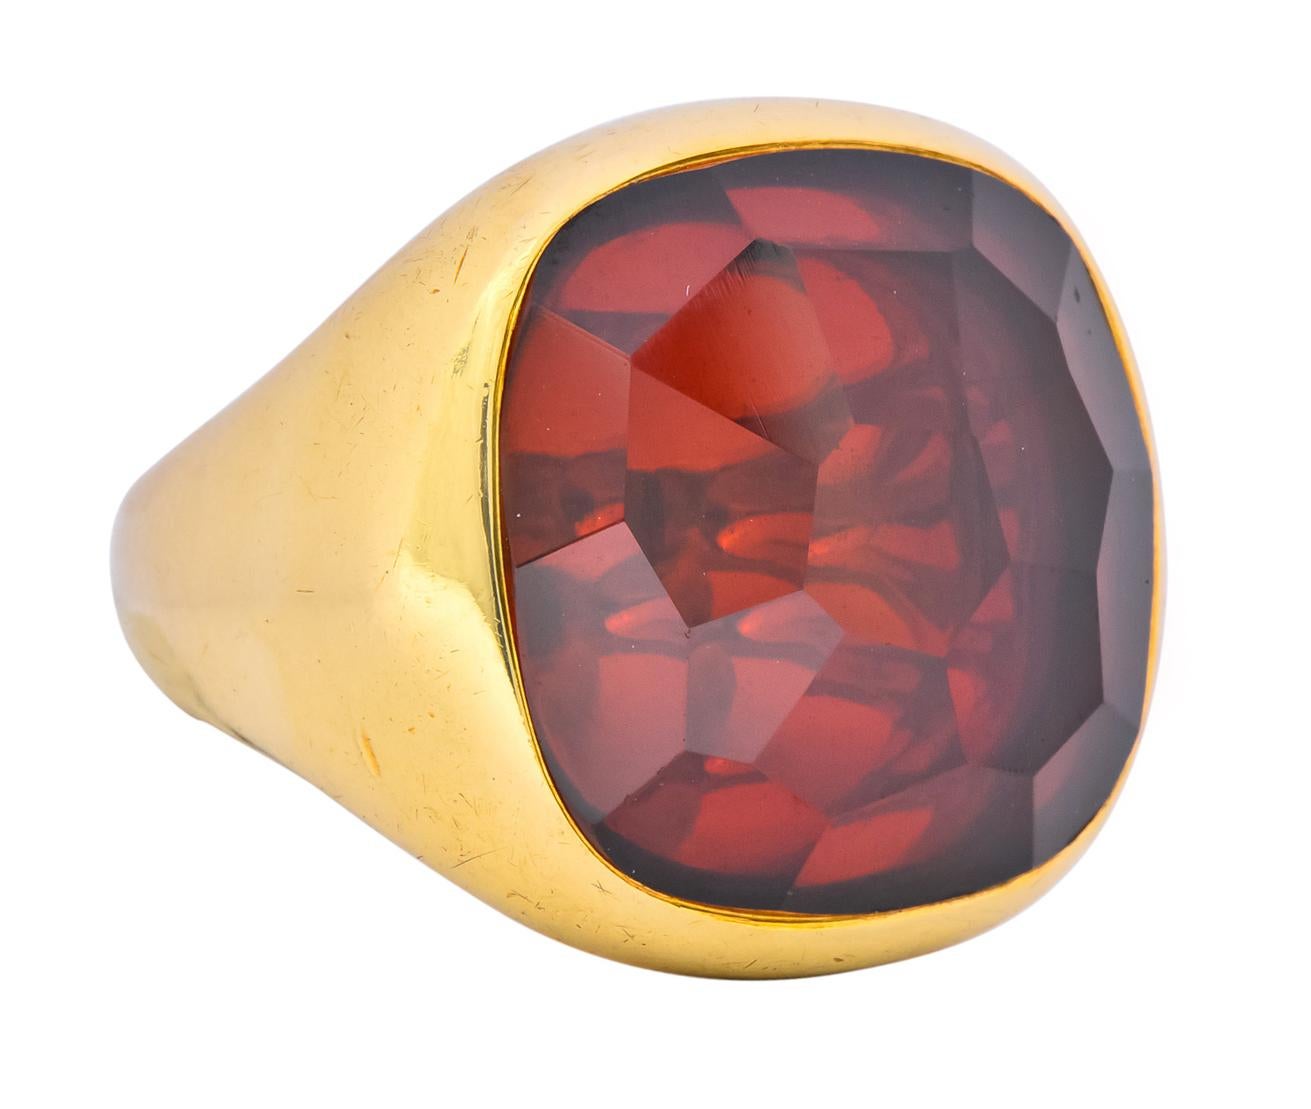 Featuring a cushion cut garnet, faceted throughout, transparent and a rich wine red

Bezel set in a bold, highly polished gold mounting

Marked 750 for 18 karat gold and fully signed Pomellato 

Circa 2000

Top measures: 21.25 mm and sits 7.4 mm